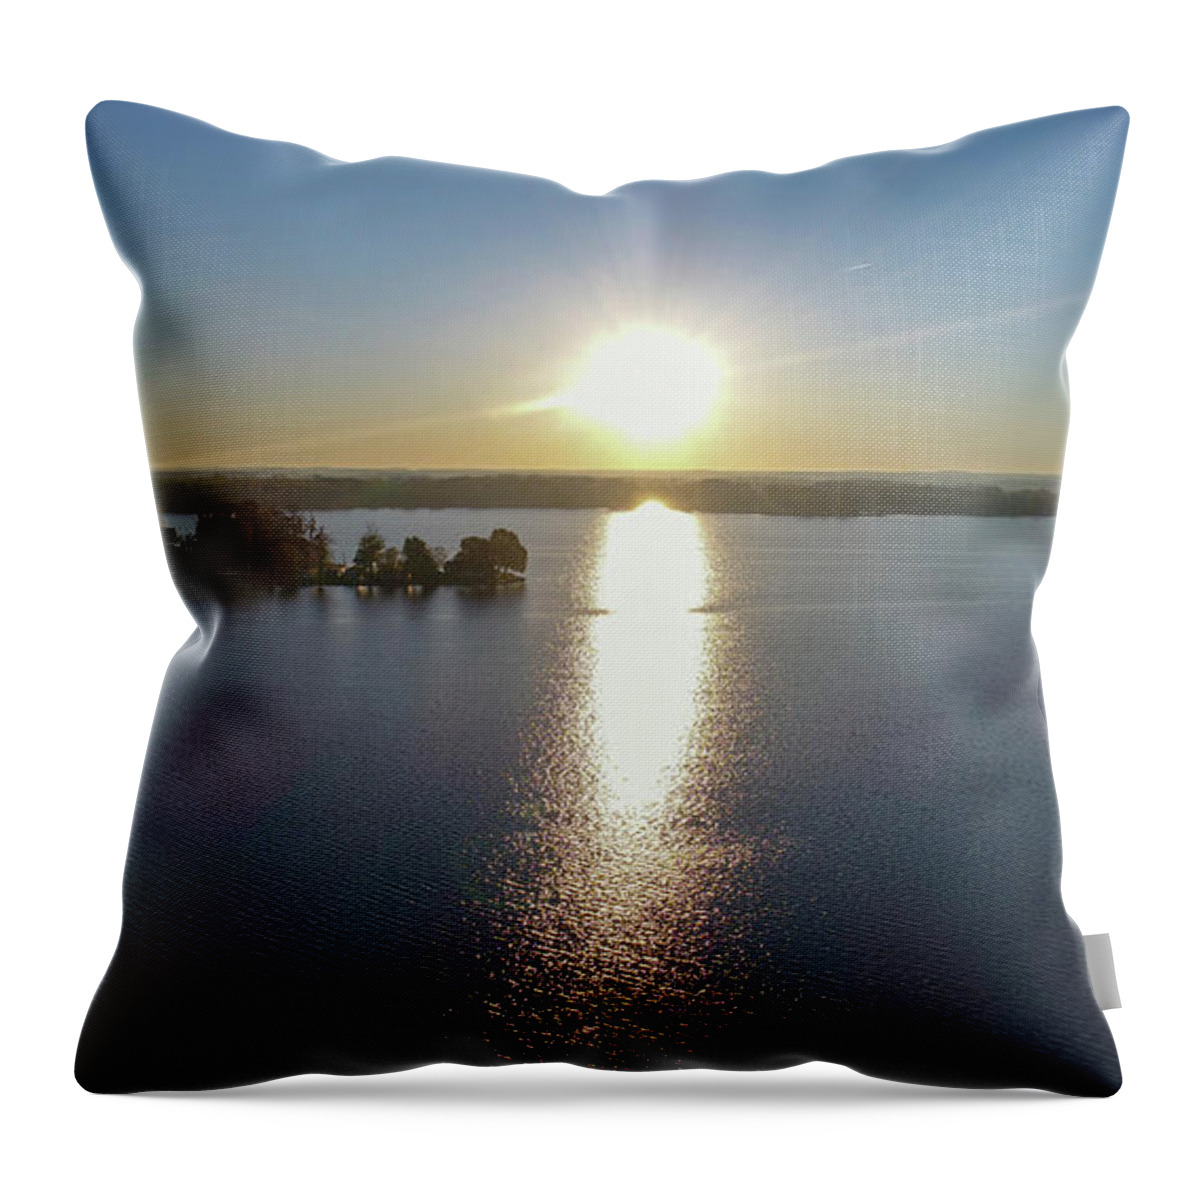  Throw Pillow featuring the photograph Sunrise #2 by Brian Jones